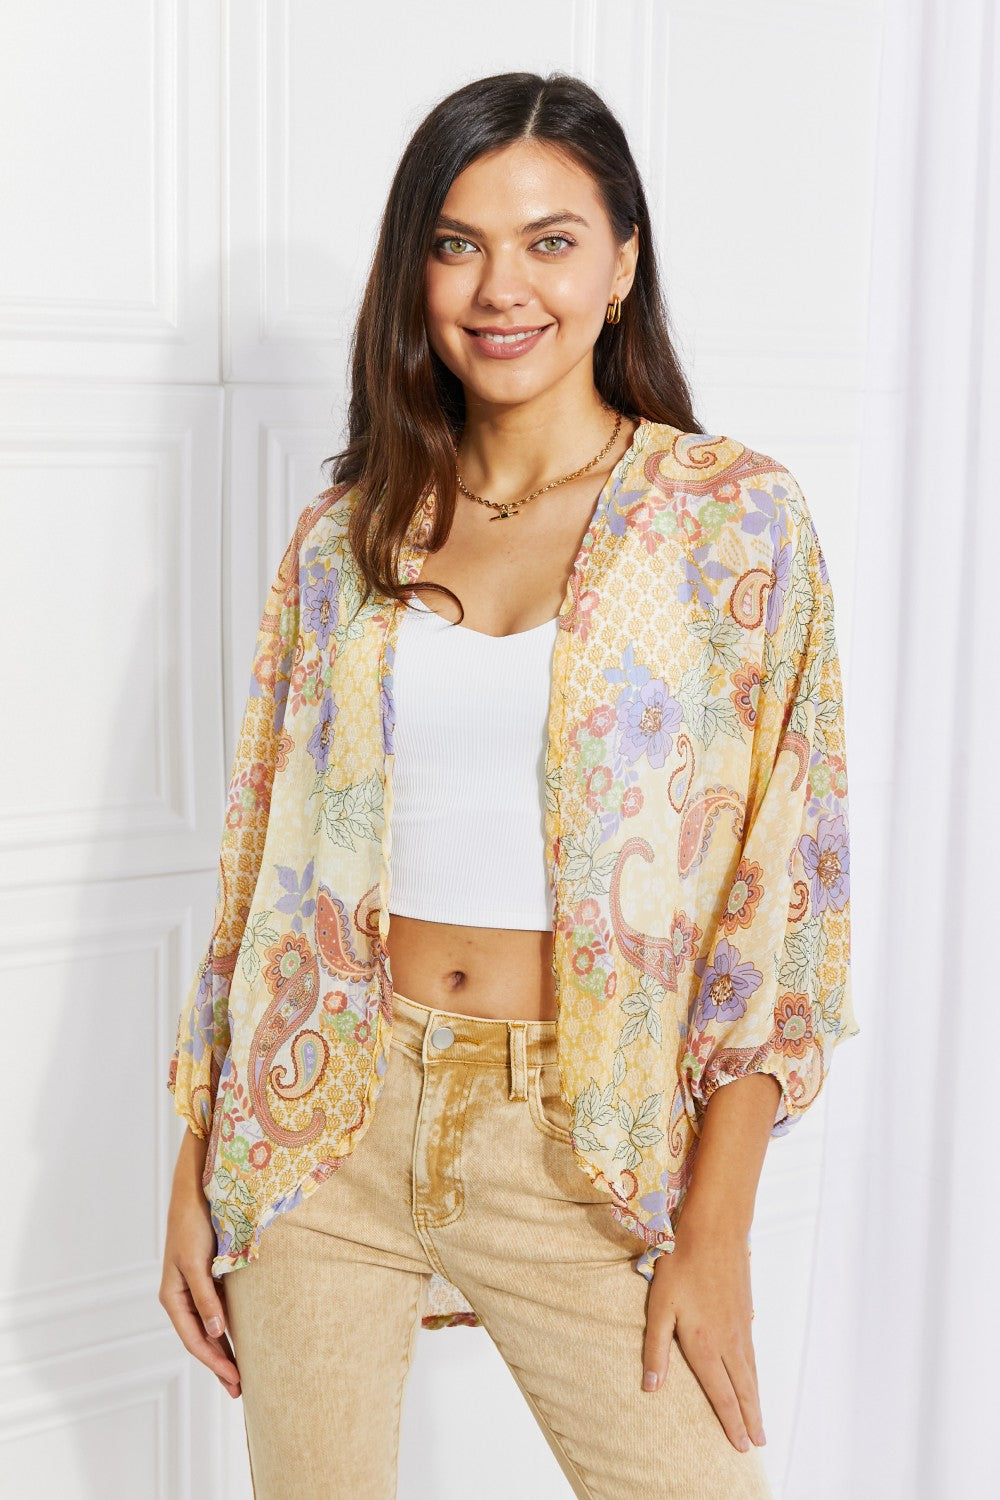 Culture Code Full Size Lasting Love Paisley Kimono-Cardigans + Kimonos-Inspired by Justeen-Women's Clothing Boutique in Chicago, Illinois